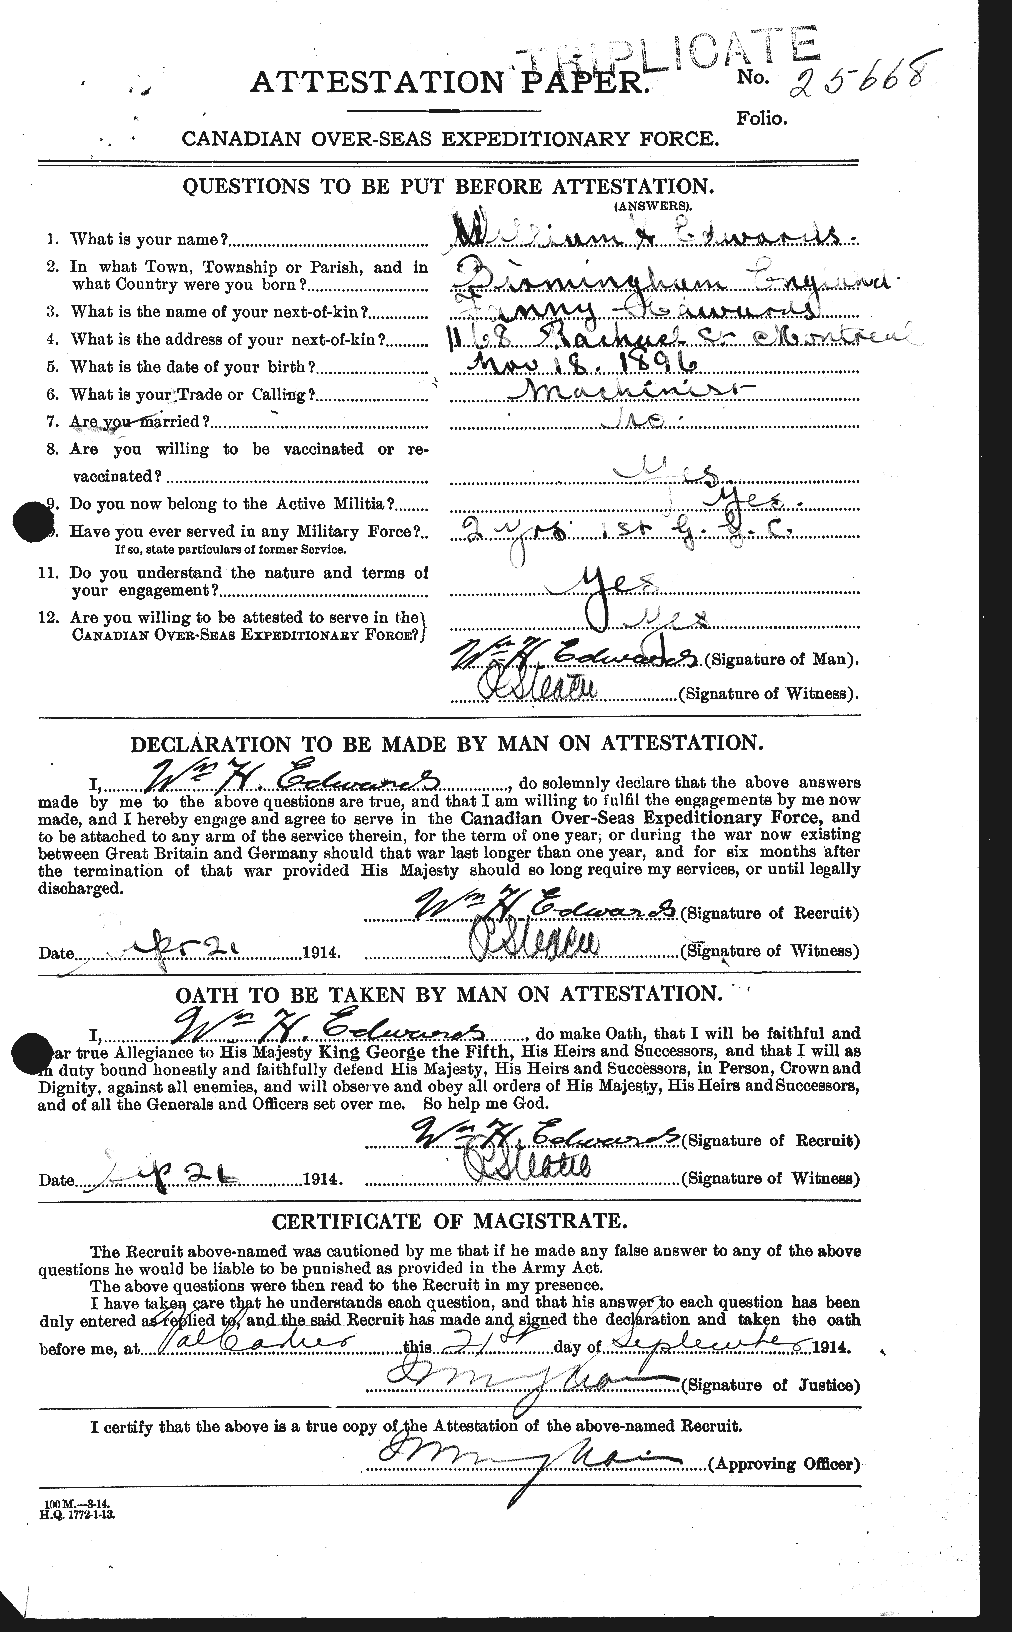 Personnel Records of the First World War - CEF 310428a